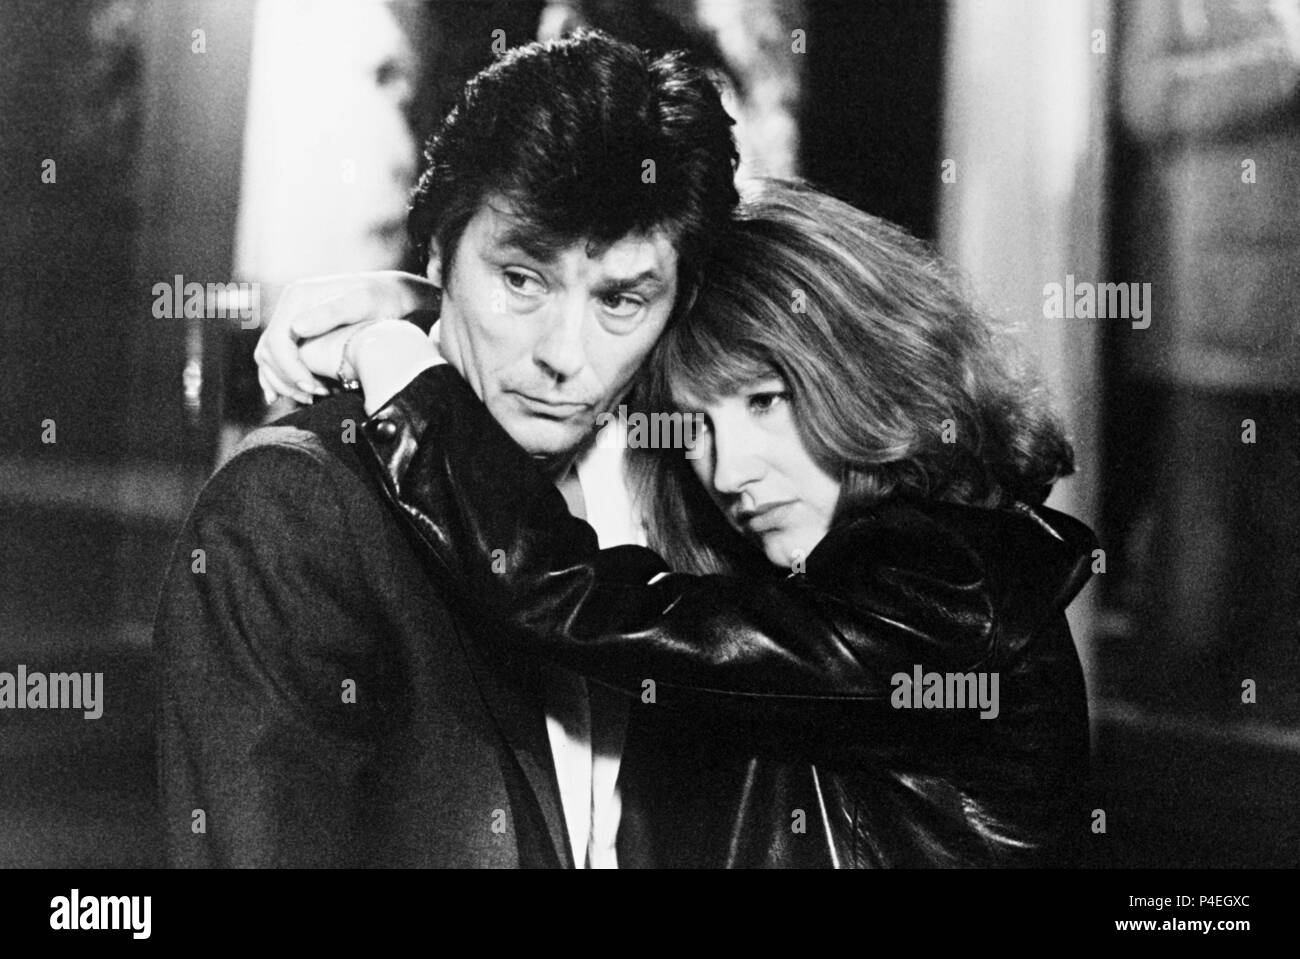 Original Film Title: NOTRE HISTOIRE.  English Title: OUR STORY.  Film Director: BERTRAND BLIER.  Year: 1984.  Stars: NATHALIE BAYE; ALAIN DELON. Credit: ADEL PRODUCTIONS / Album Stock Photo